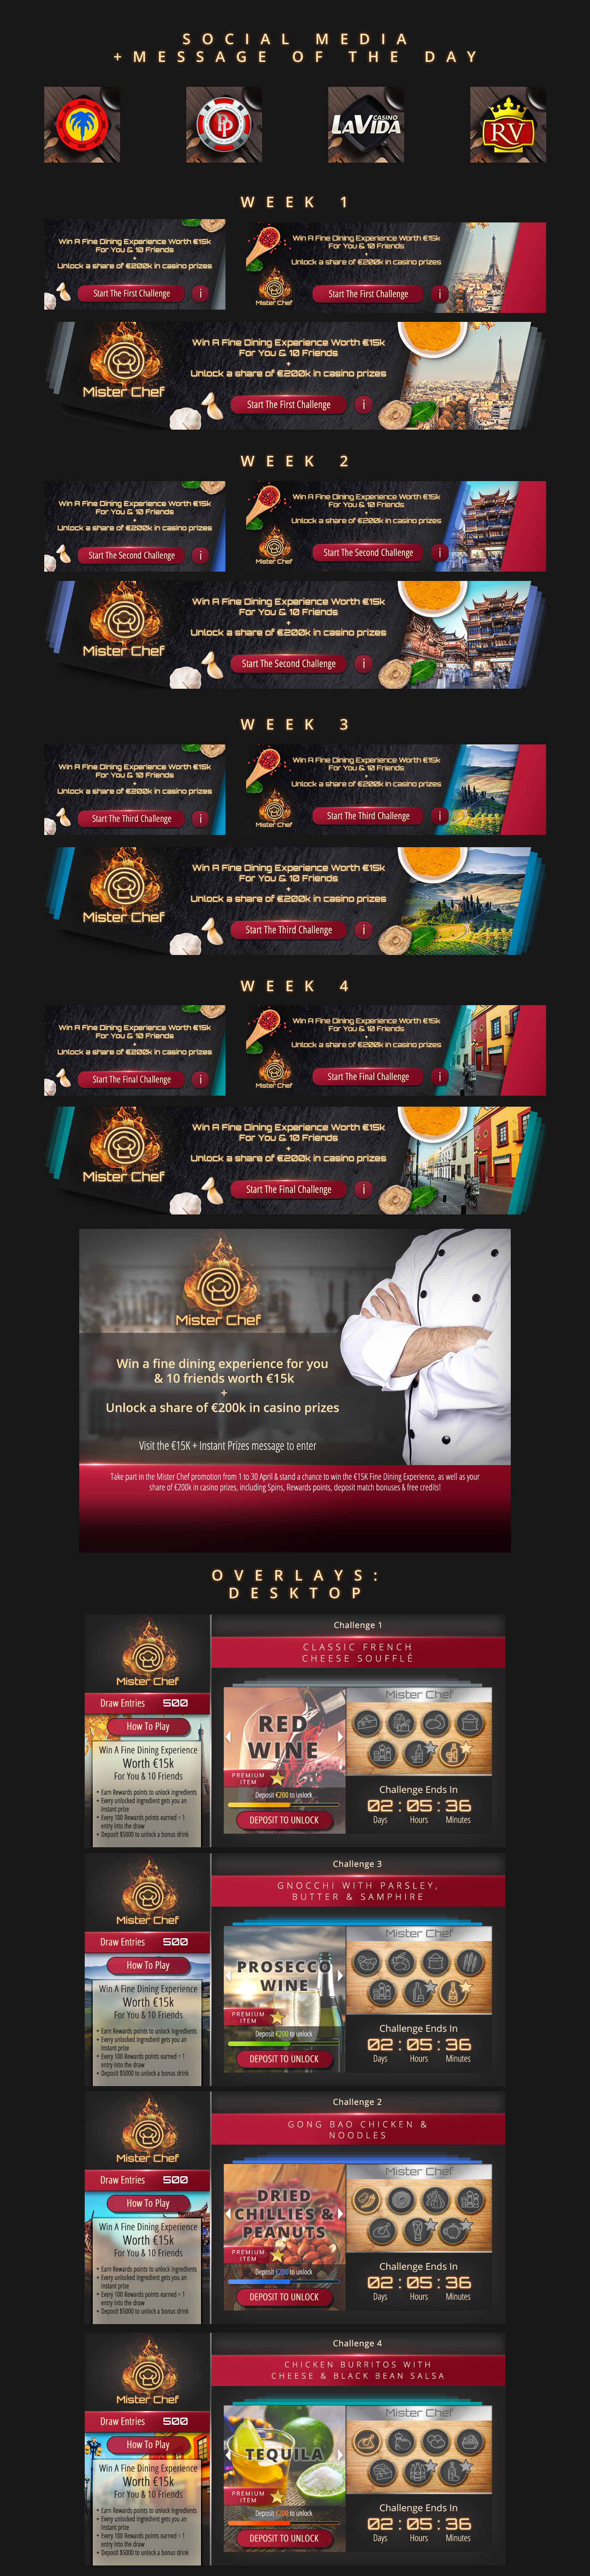 mr chef chef Food  master chef Casino Promo retention marketing   Mini Game Global Promotion  online casino assets game graphics black red Hot fire lit mister chef foodie selection Best of